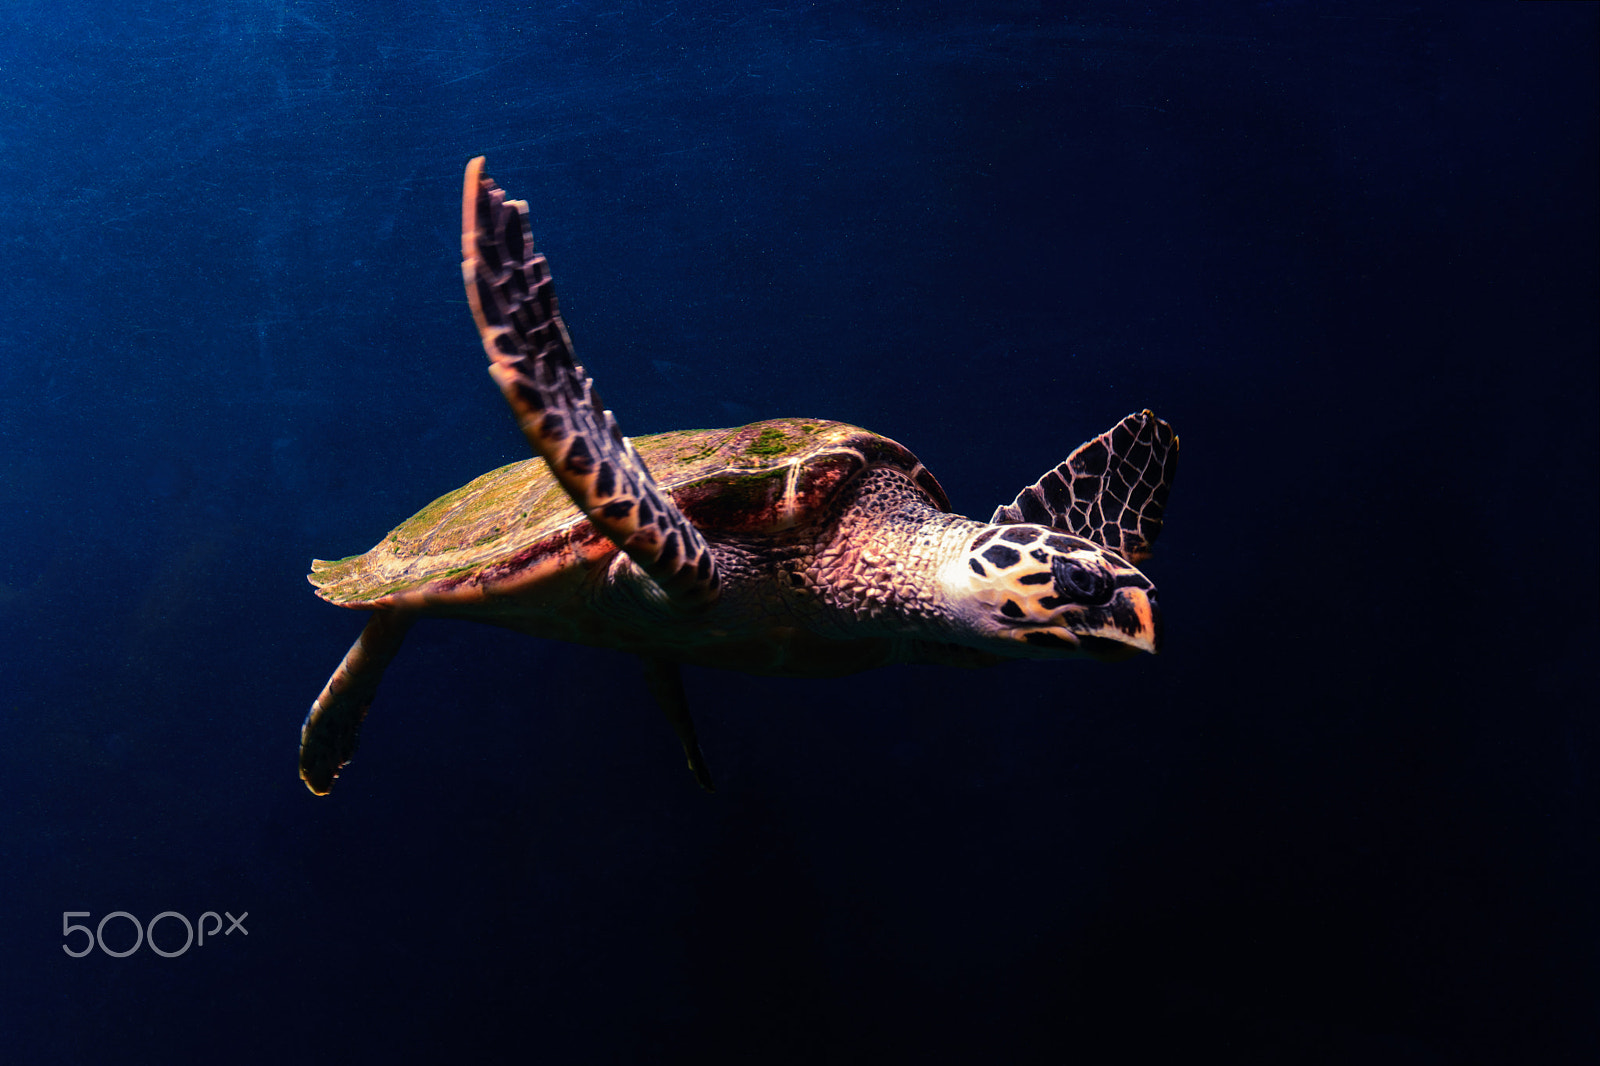 Nikon D5200 + Sigma 17-70mm F2.8-4 DC Macro OS HSM | C sample photo. Green turtle in the blue. photography